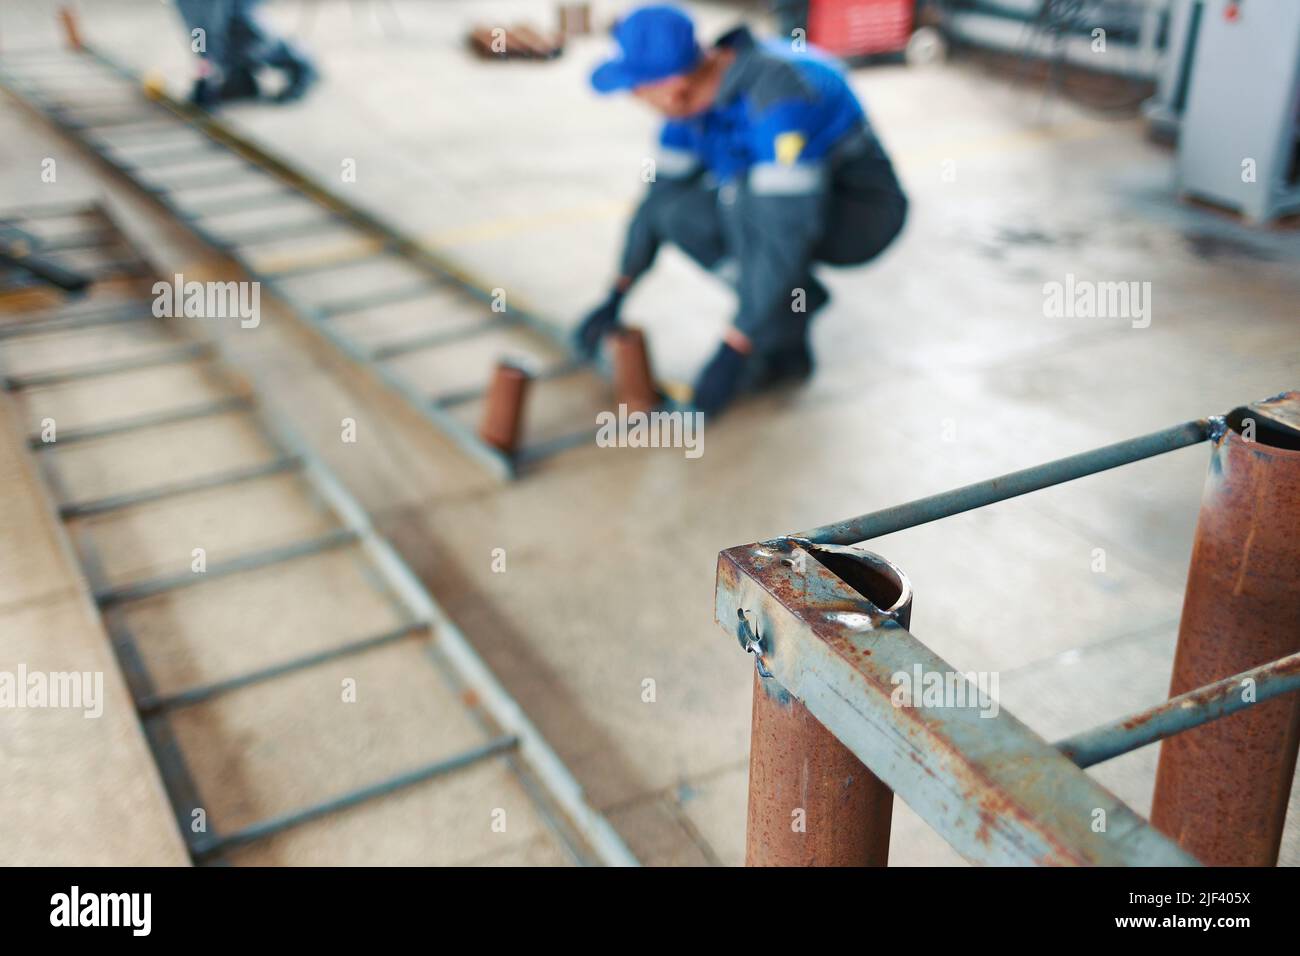 Workers in overalls make metal structures in workshop. Industrial background. Selective focus. Work in production. Real scene. Stock Photo